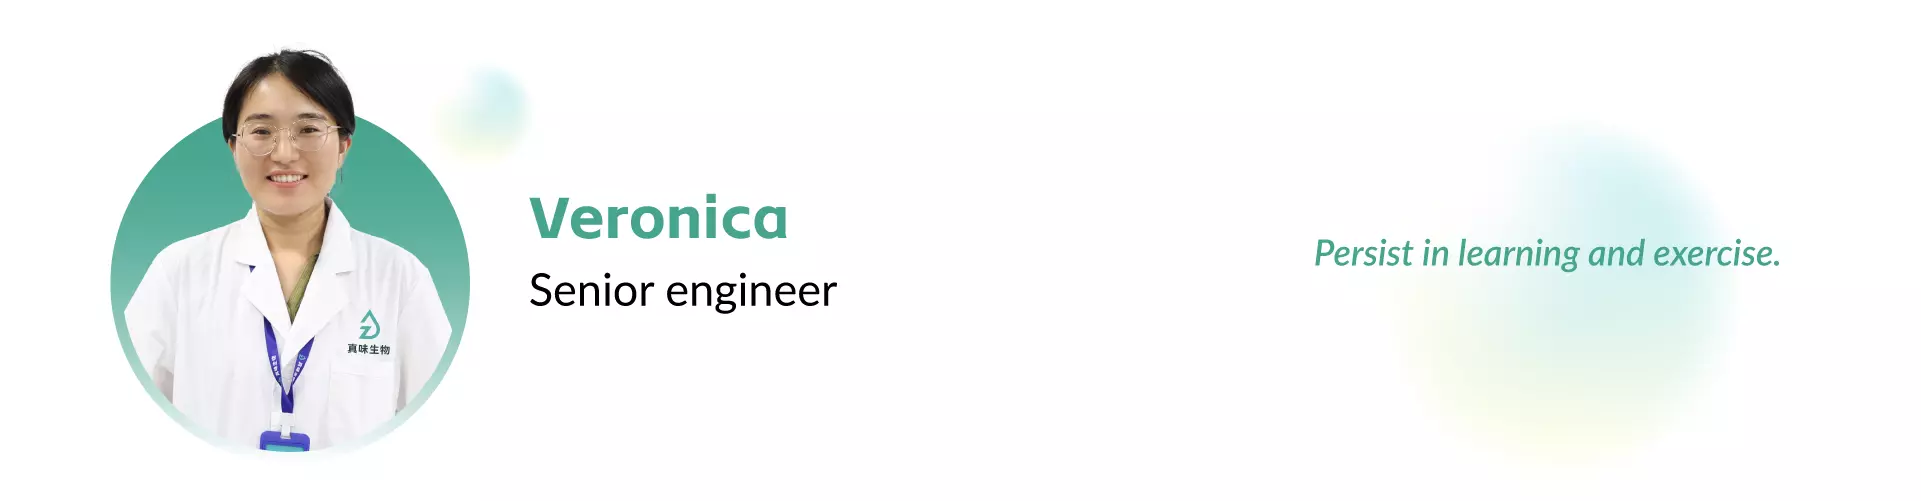 Walks with Technology | Personal Interview of Zinwi Biotech R&D Engineers (Phase 2) - Veronica Senior engineer